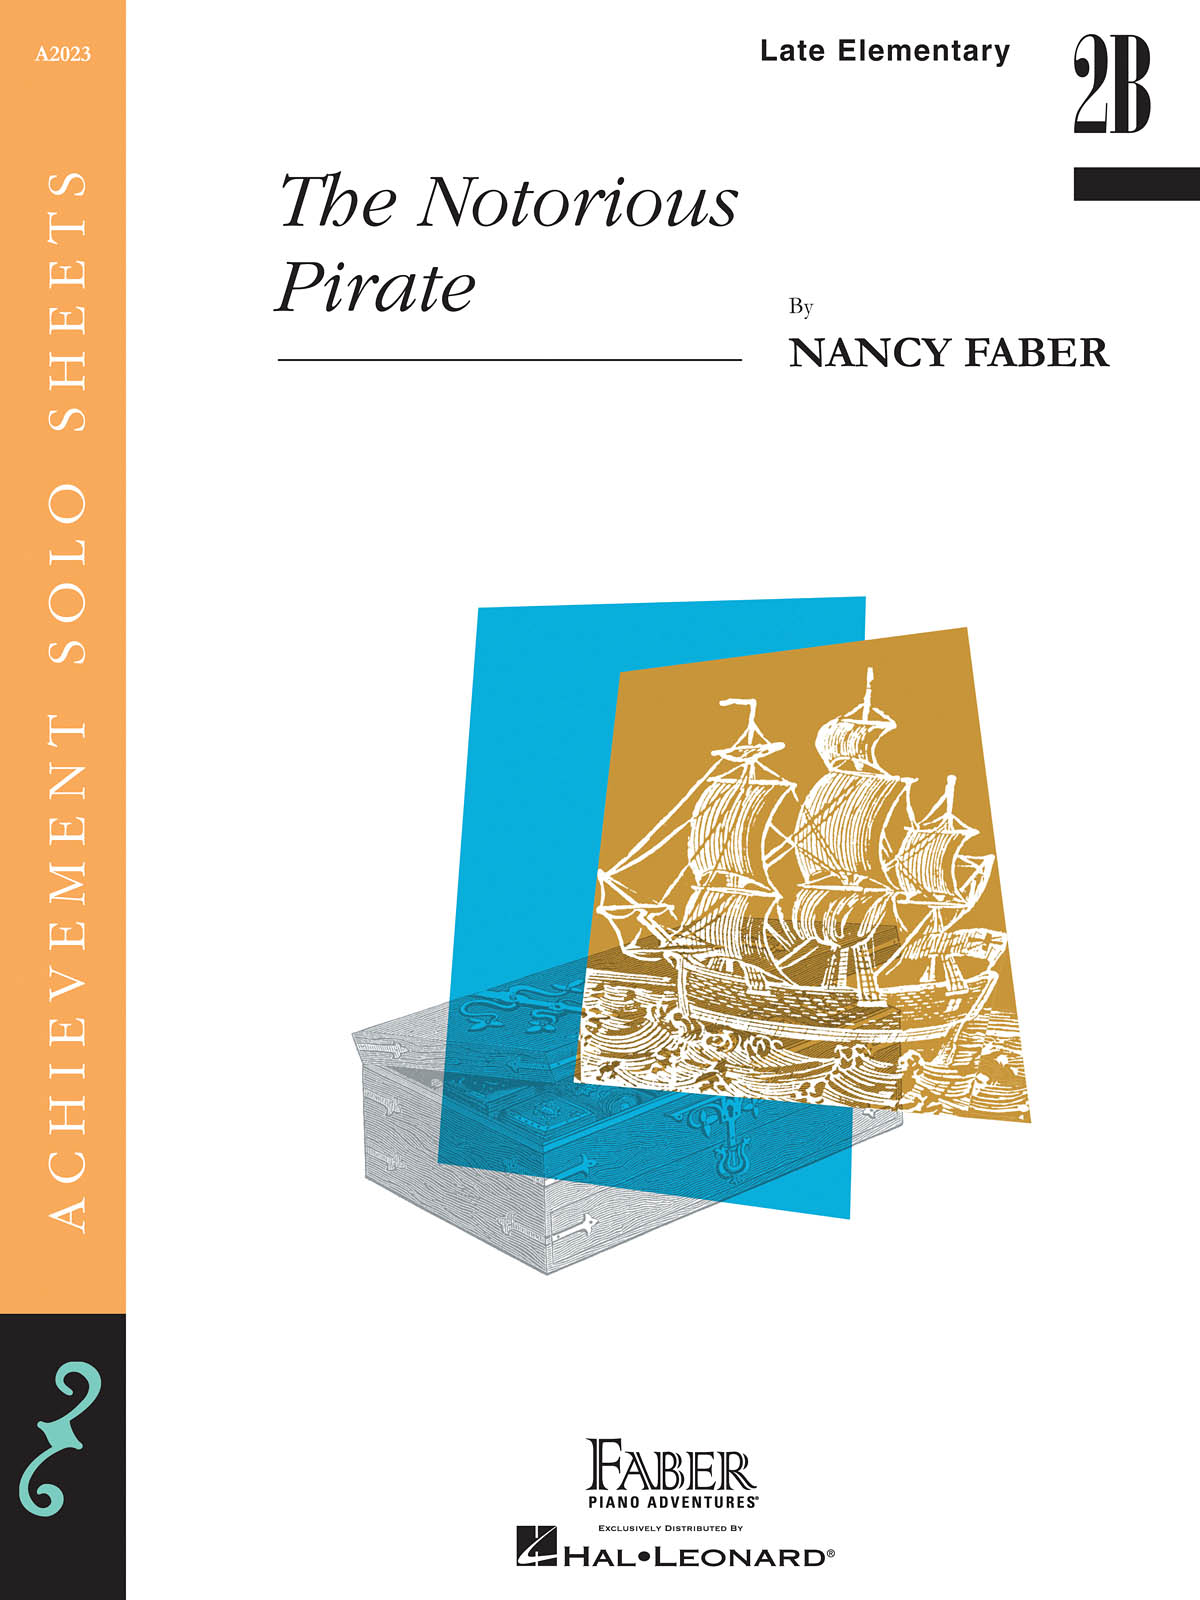 Nancy Faber: The Notorious Pirate